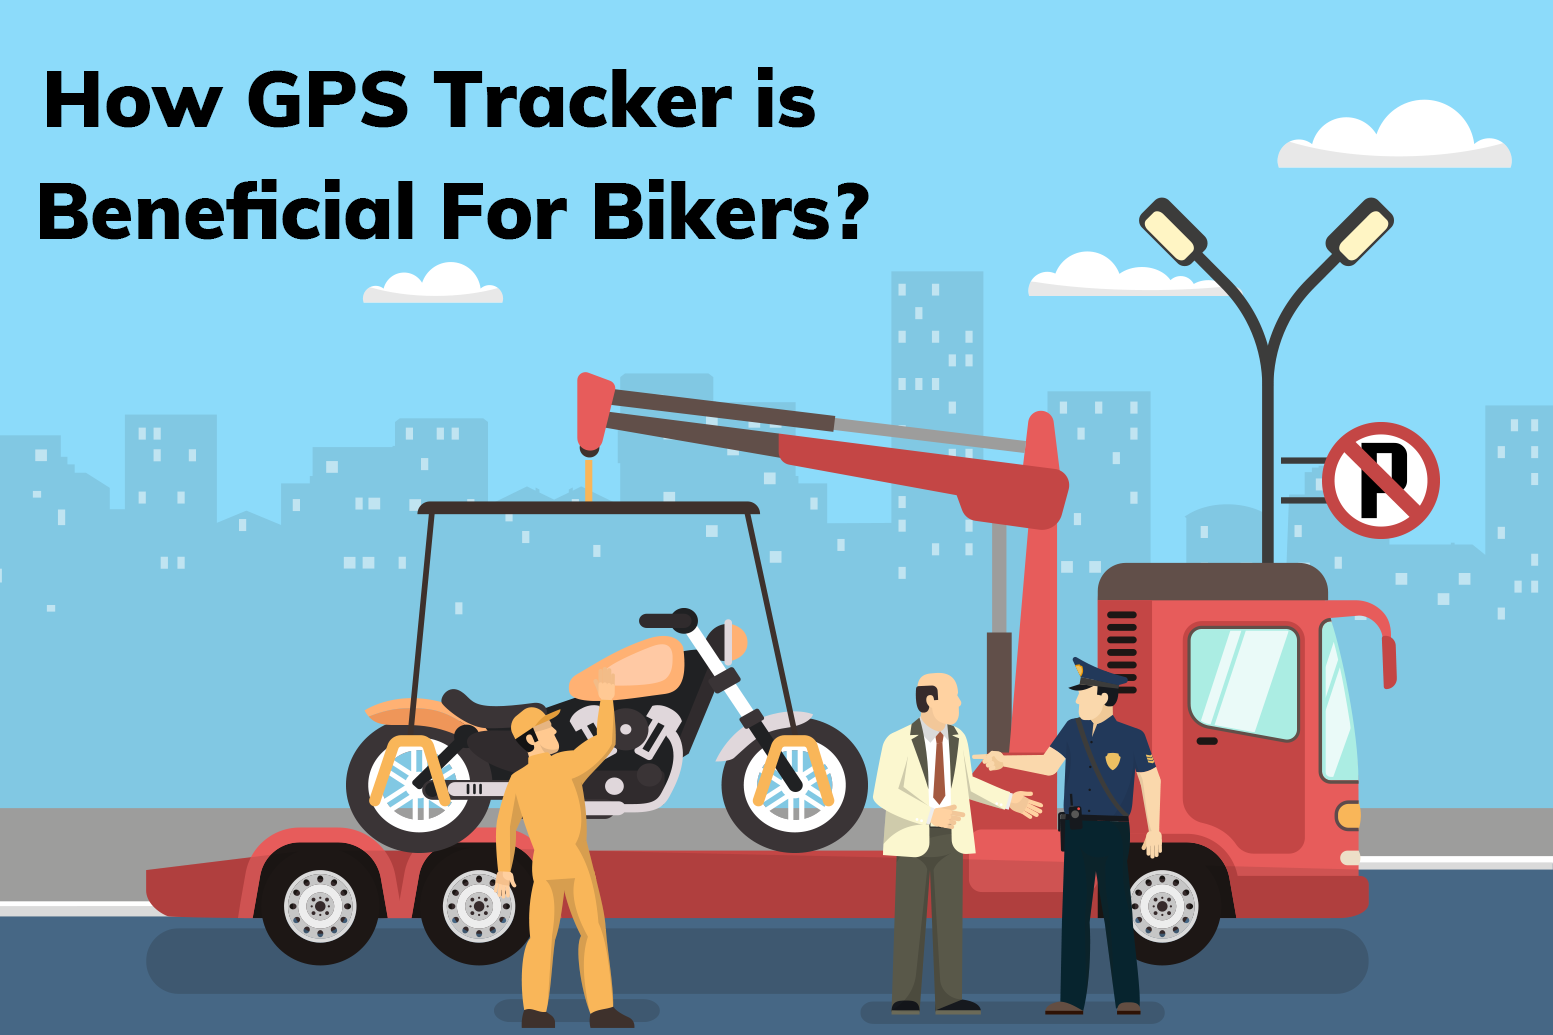 How GPS tracker beneficial for bikers